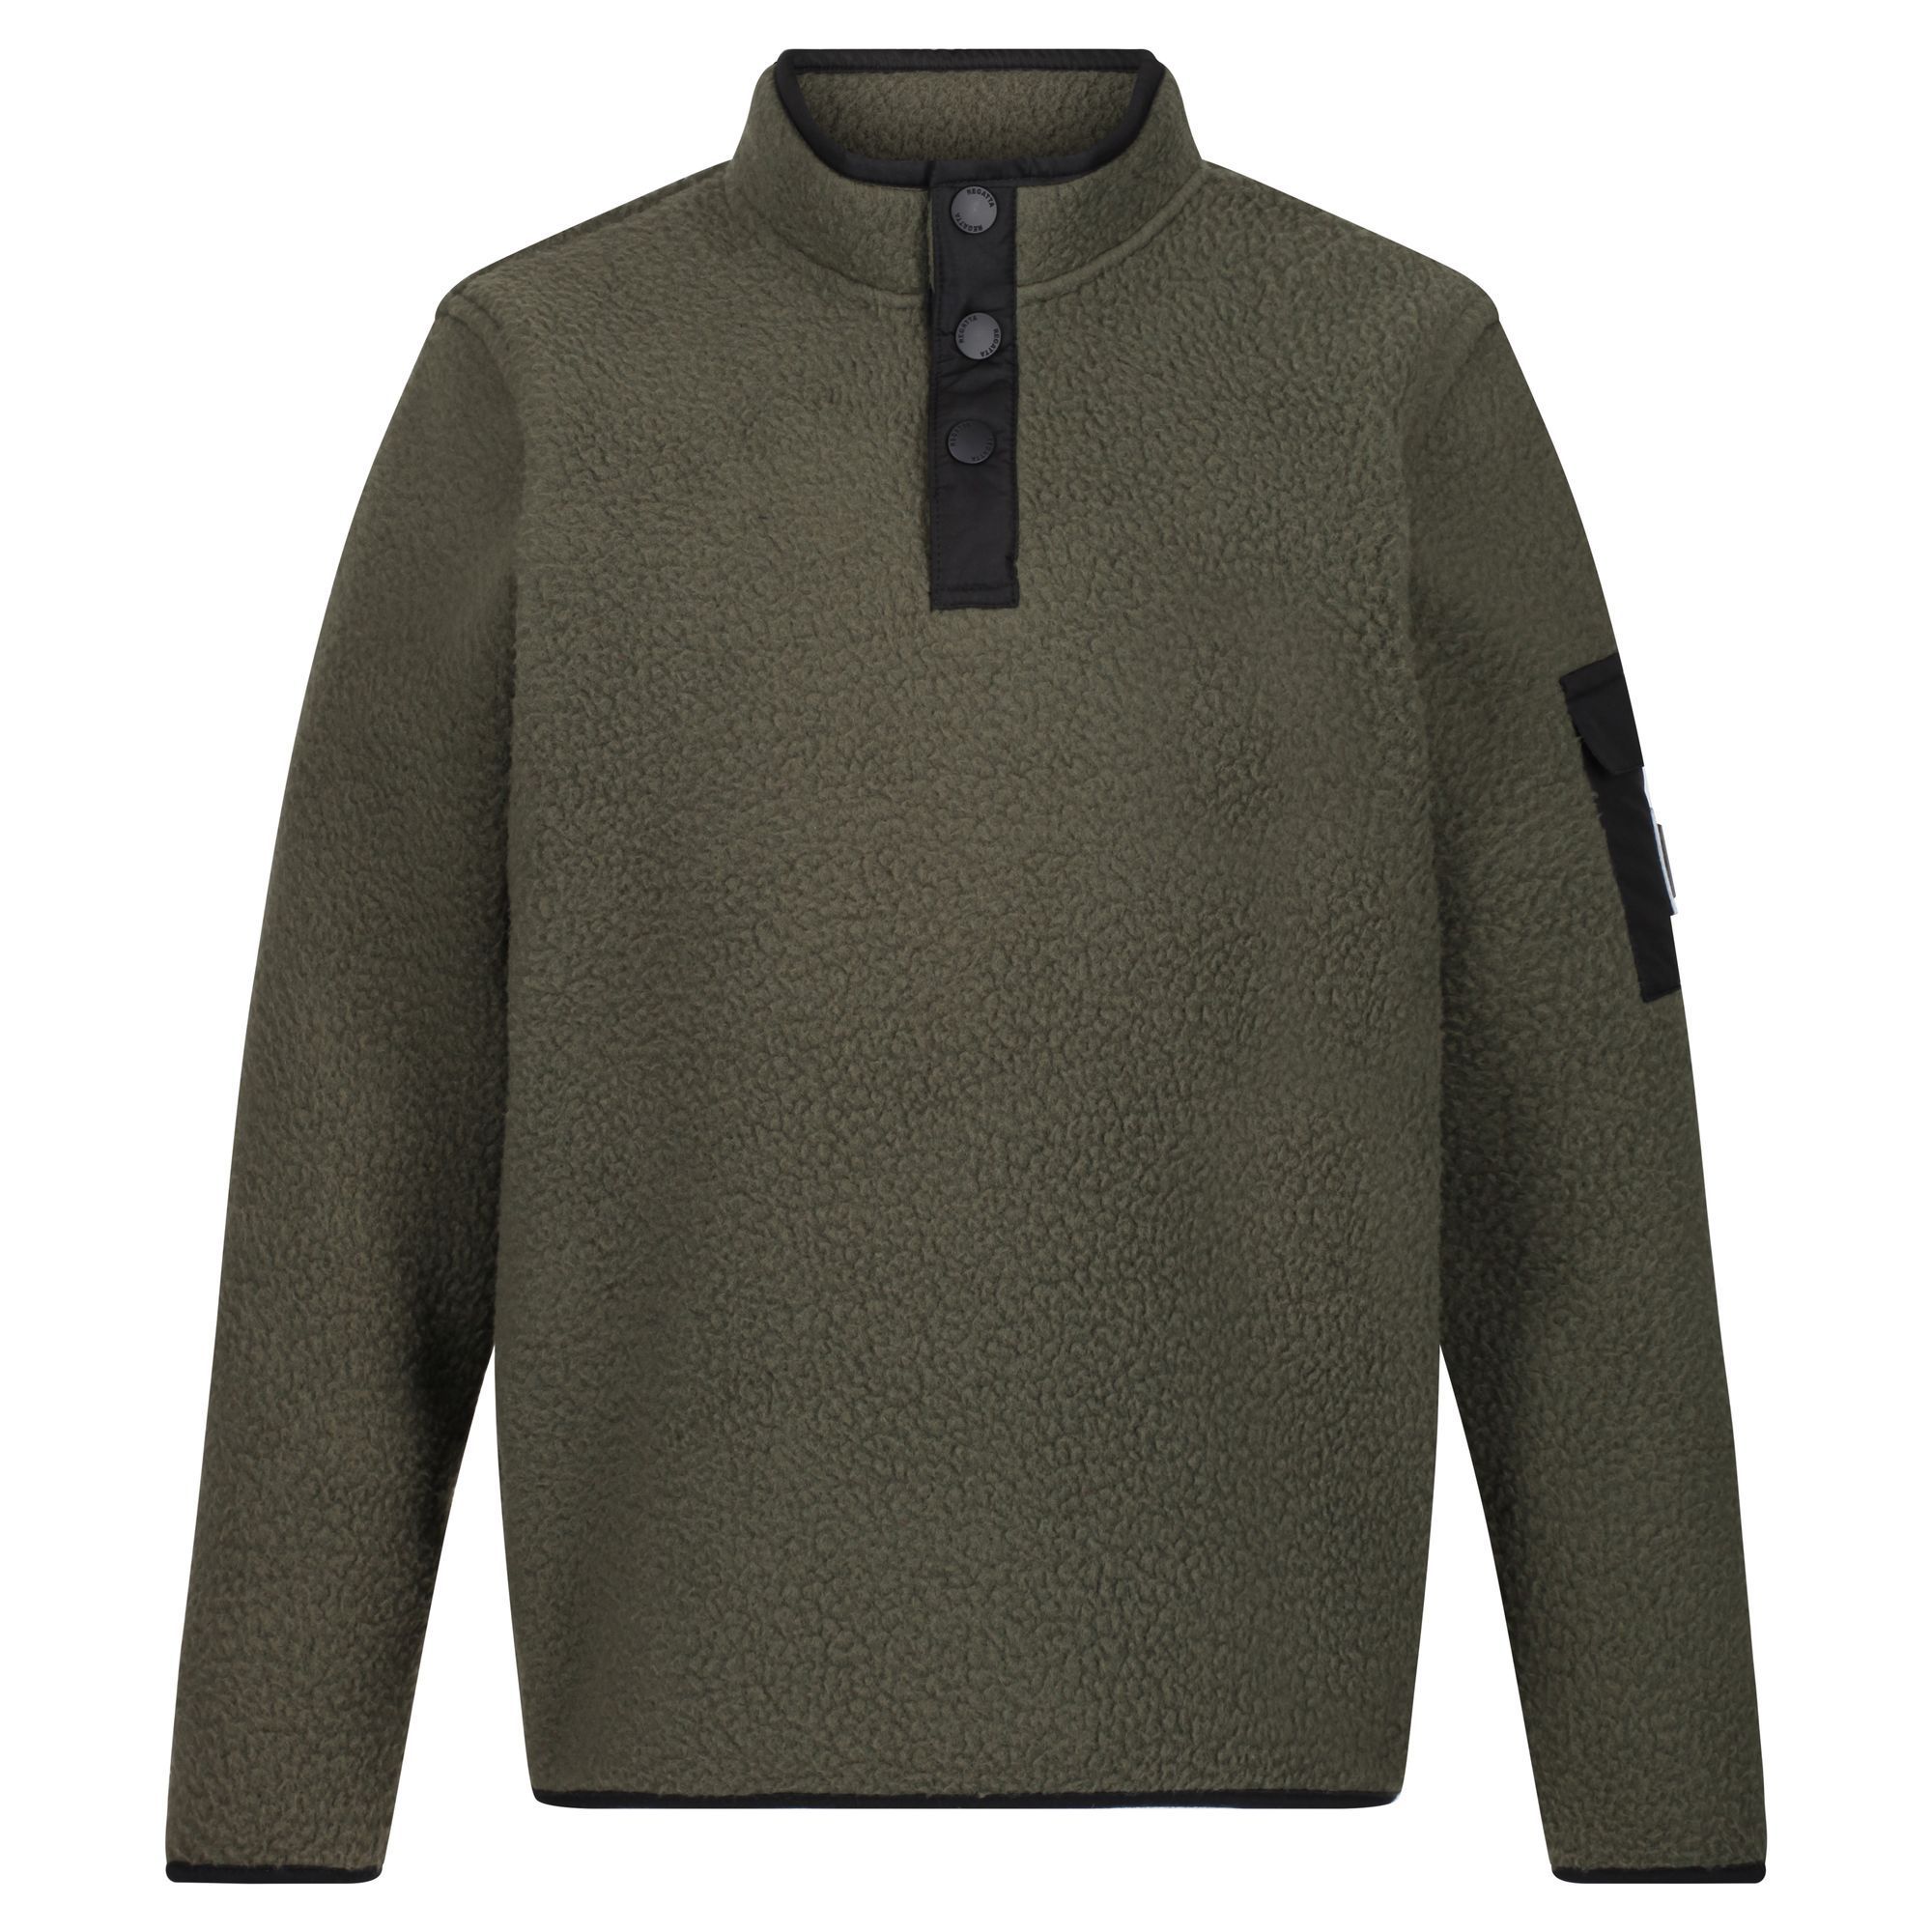 100% polyester high pile borg fleece. Polyester micro poplin woven overlays to collar, placket and pocket. Half placket with branded snap fastening. Sleeve patch pocket.